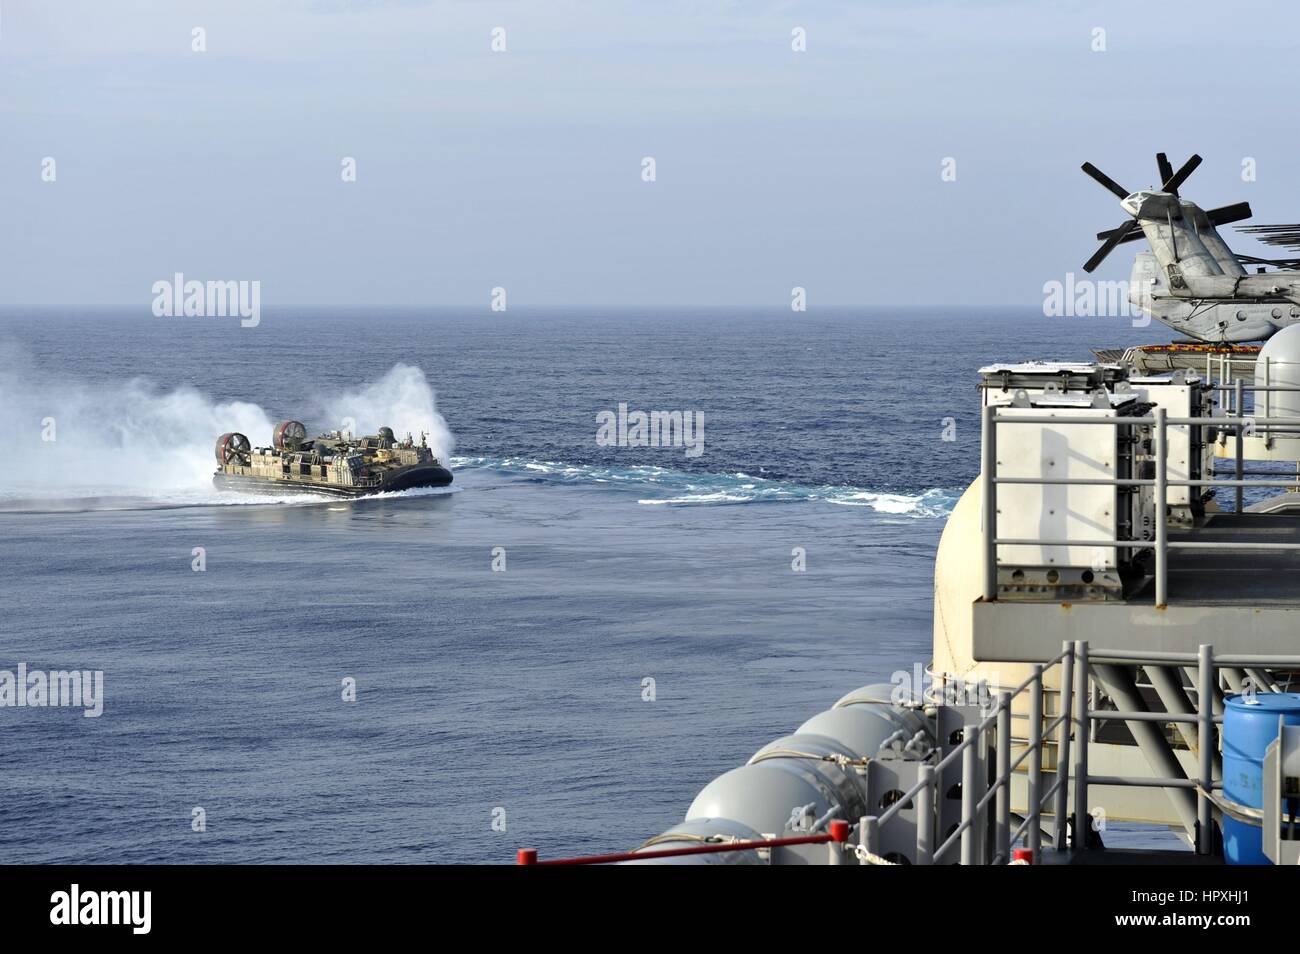 A landing craft air cushion approaches the stern of the amphibious assault ship USS Bonhomme Richard, East China Sea, February 2, 2013. Image courtesy US Navy. Stock Photo